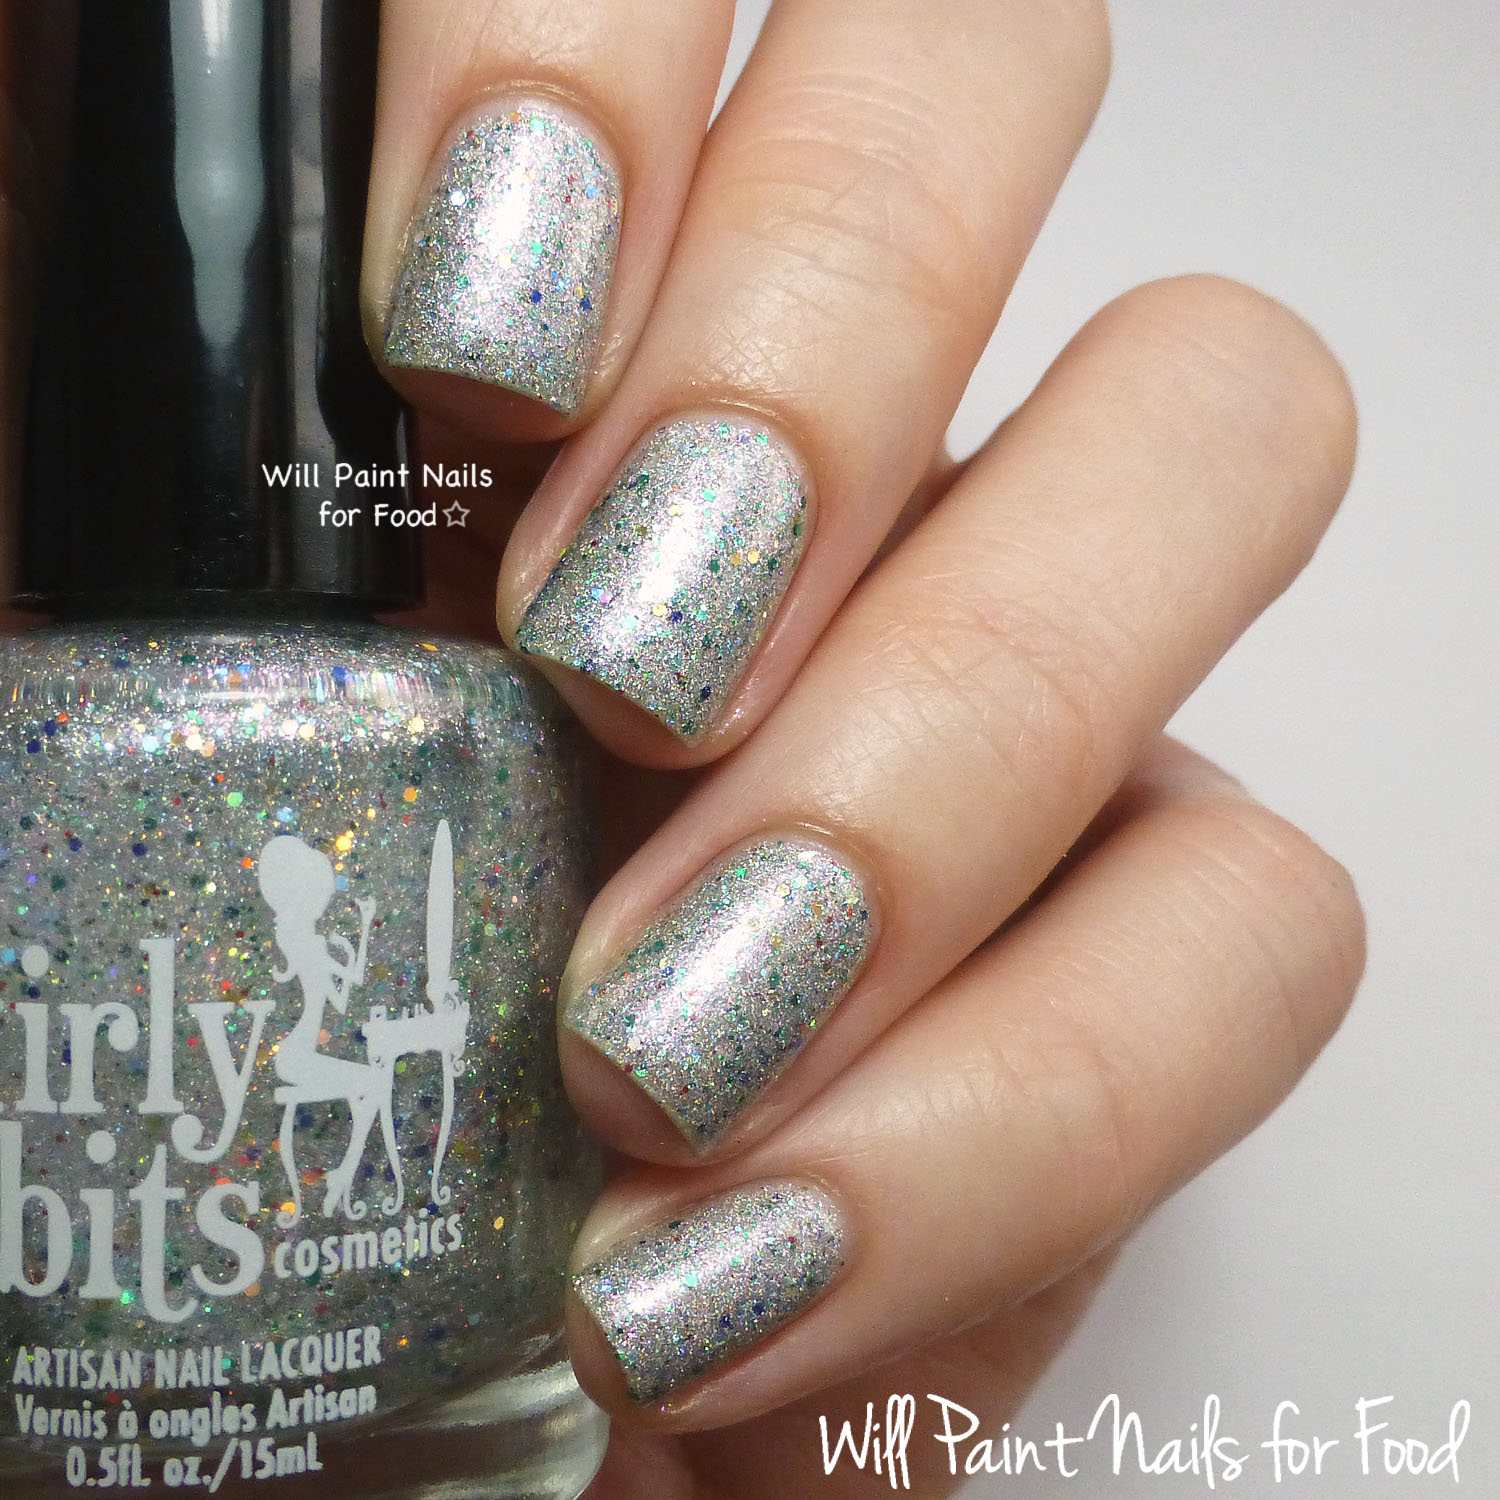 Girly Bits A Twinkle in Time swatch